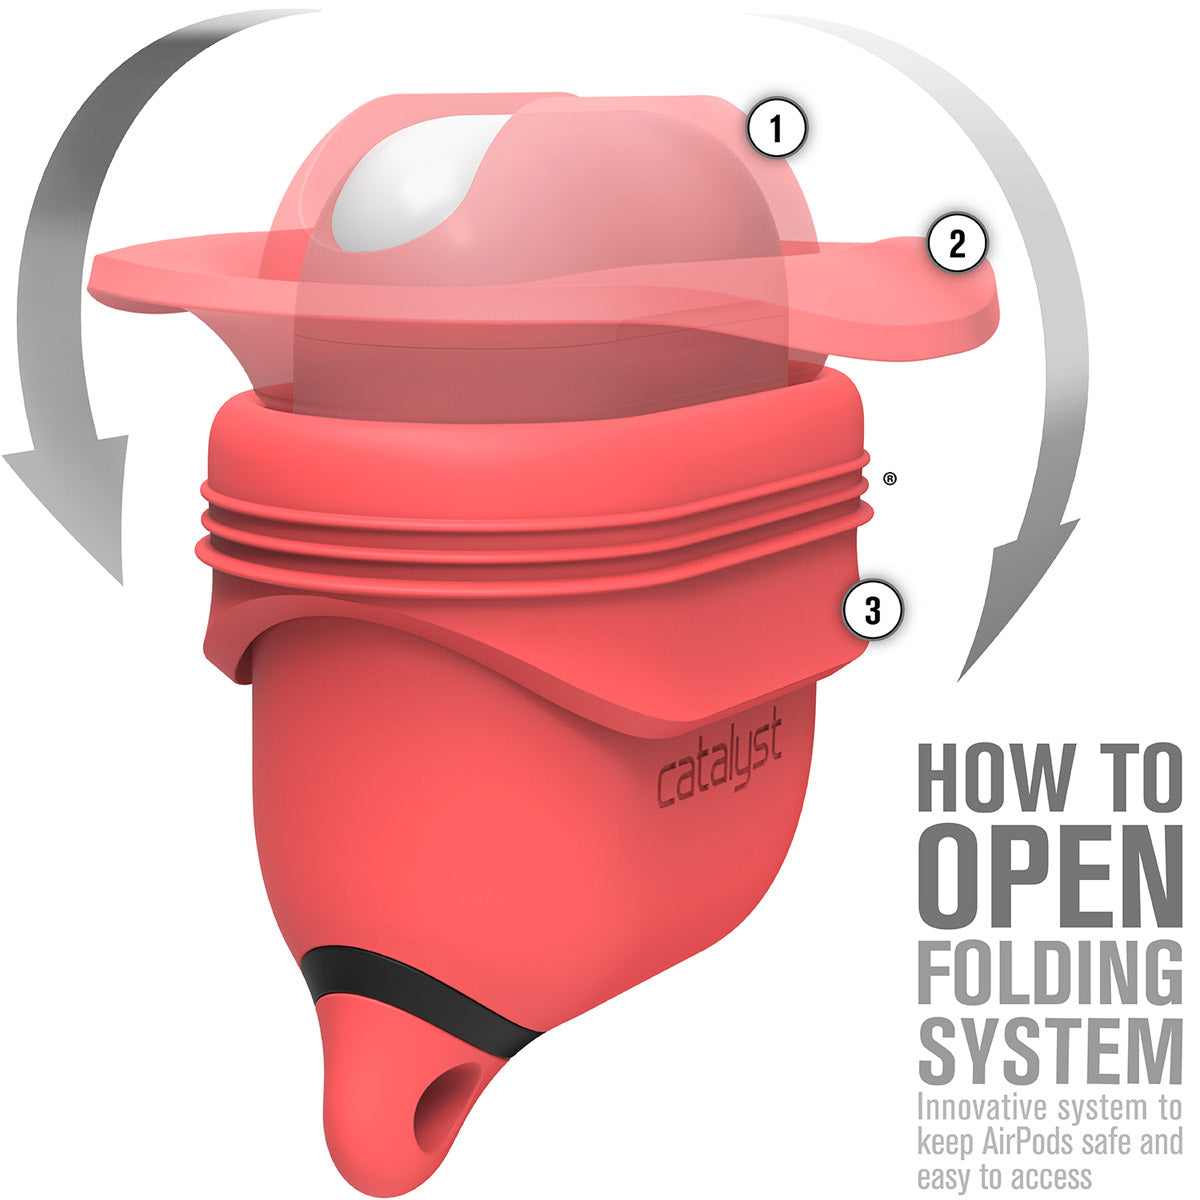 CATAPDCOR | Catalyst airpods gen2/1 waterproof case + carabiner showing the-foldable silicone in coral text reads how to open folding system innovative system to keep airpods safe and easy to access